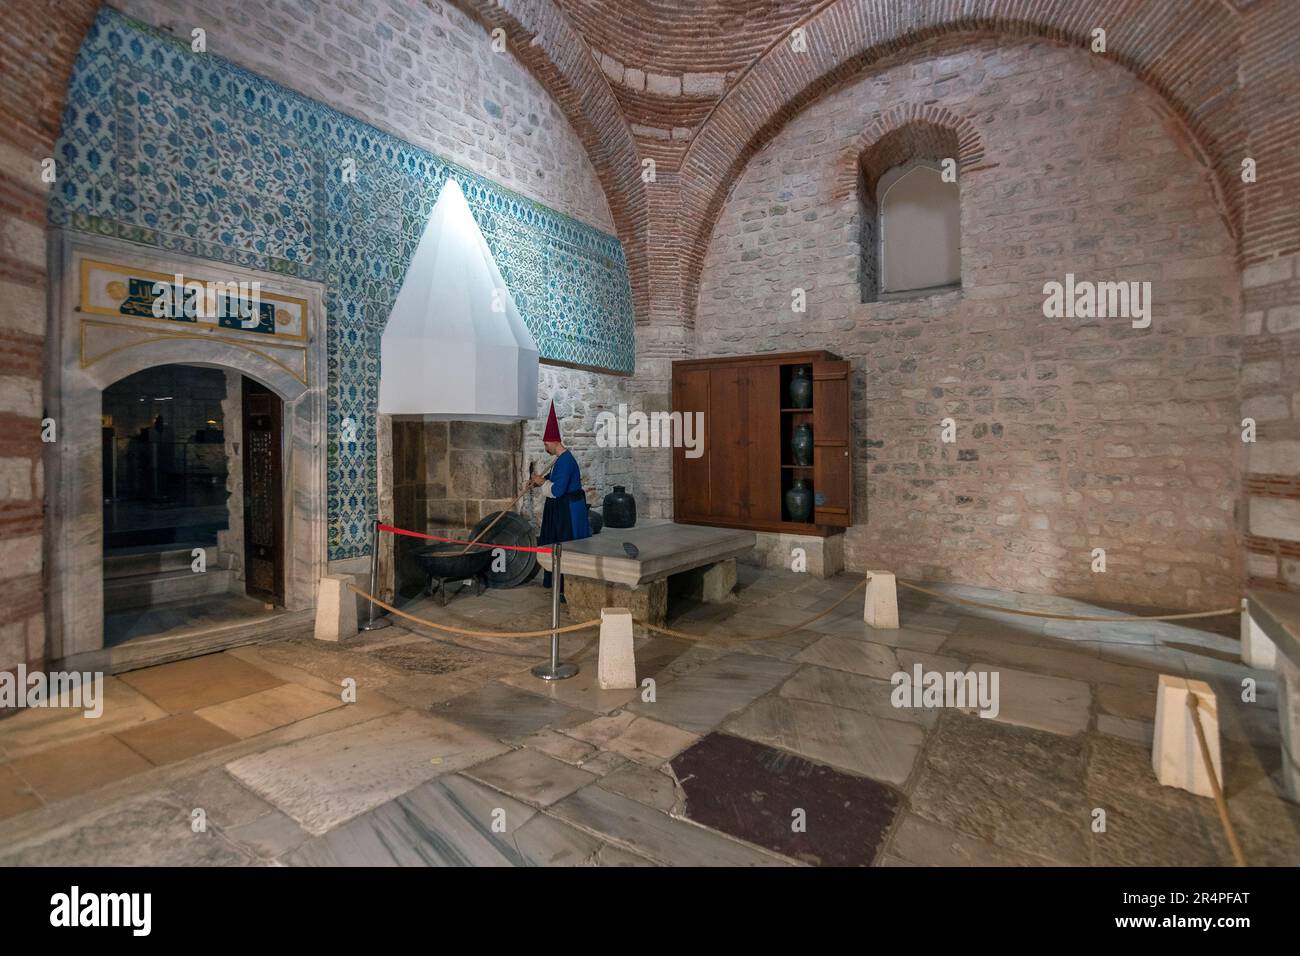 The palace kitchens sections in Topkapi Palace, Istanbul, Turkey Stock Photo